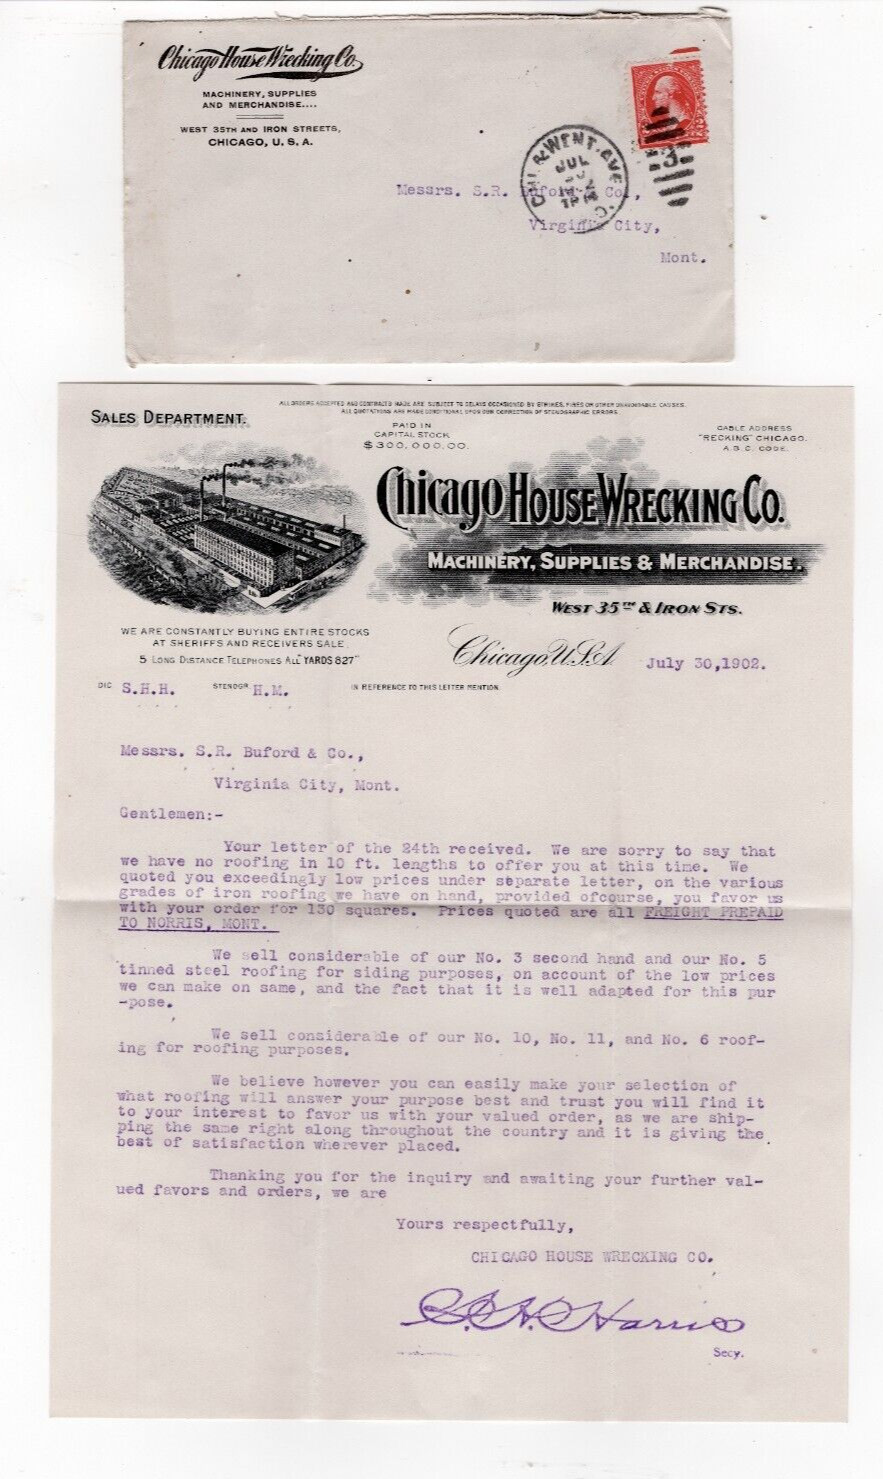 1902 Chicago House Wrecking Co. Cover and Letterhead RE: Material Inquiry